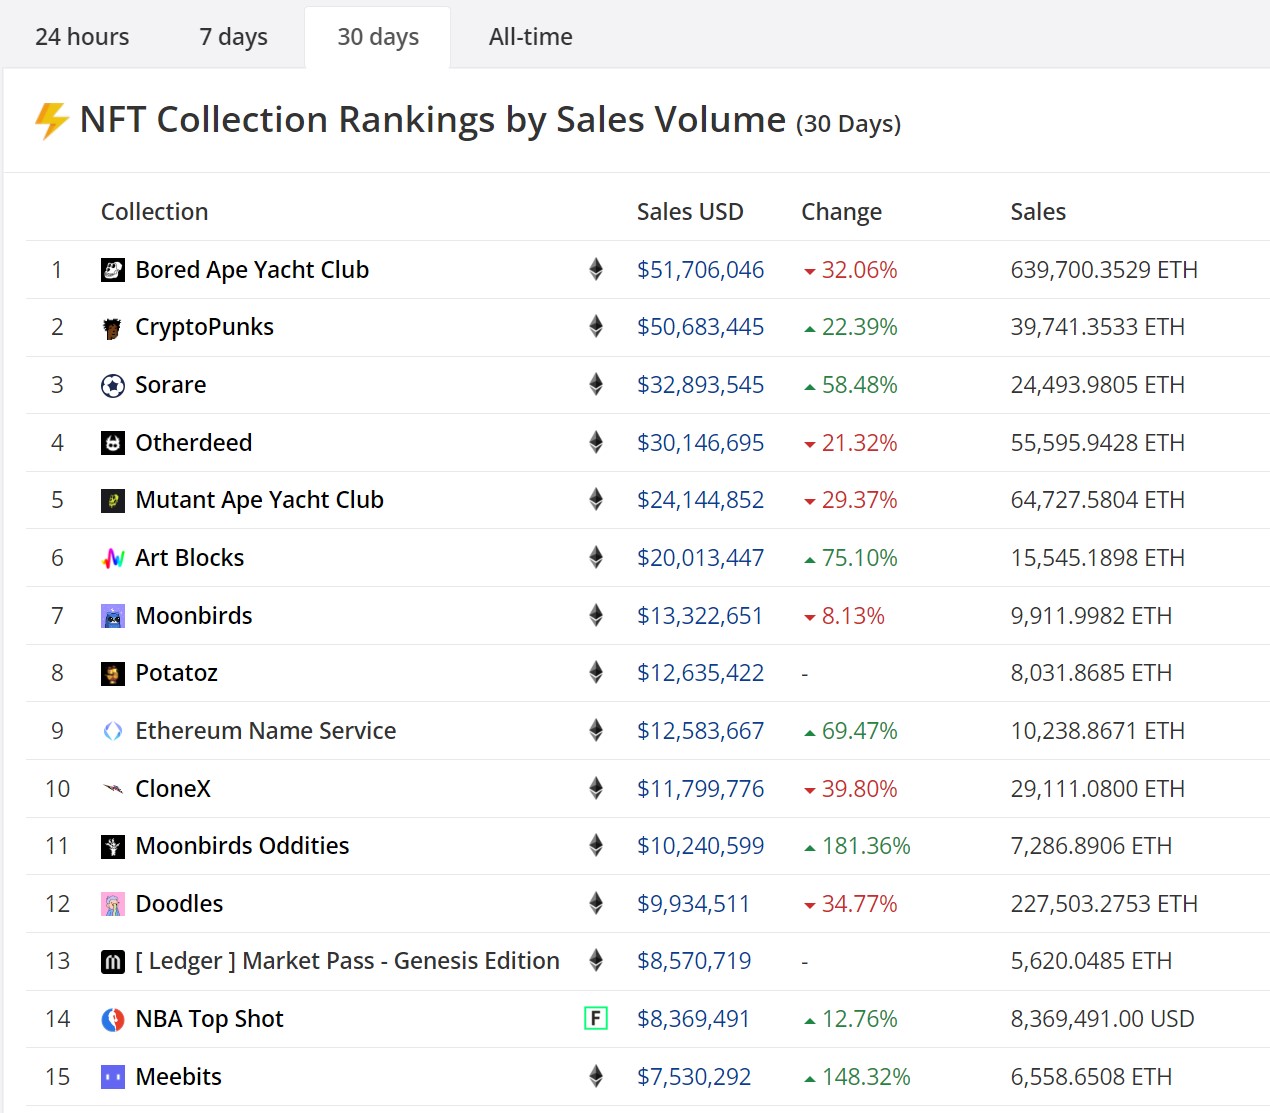 NFT collection rankings by sales volume